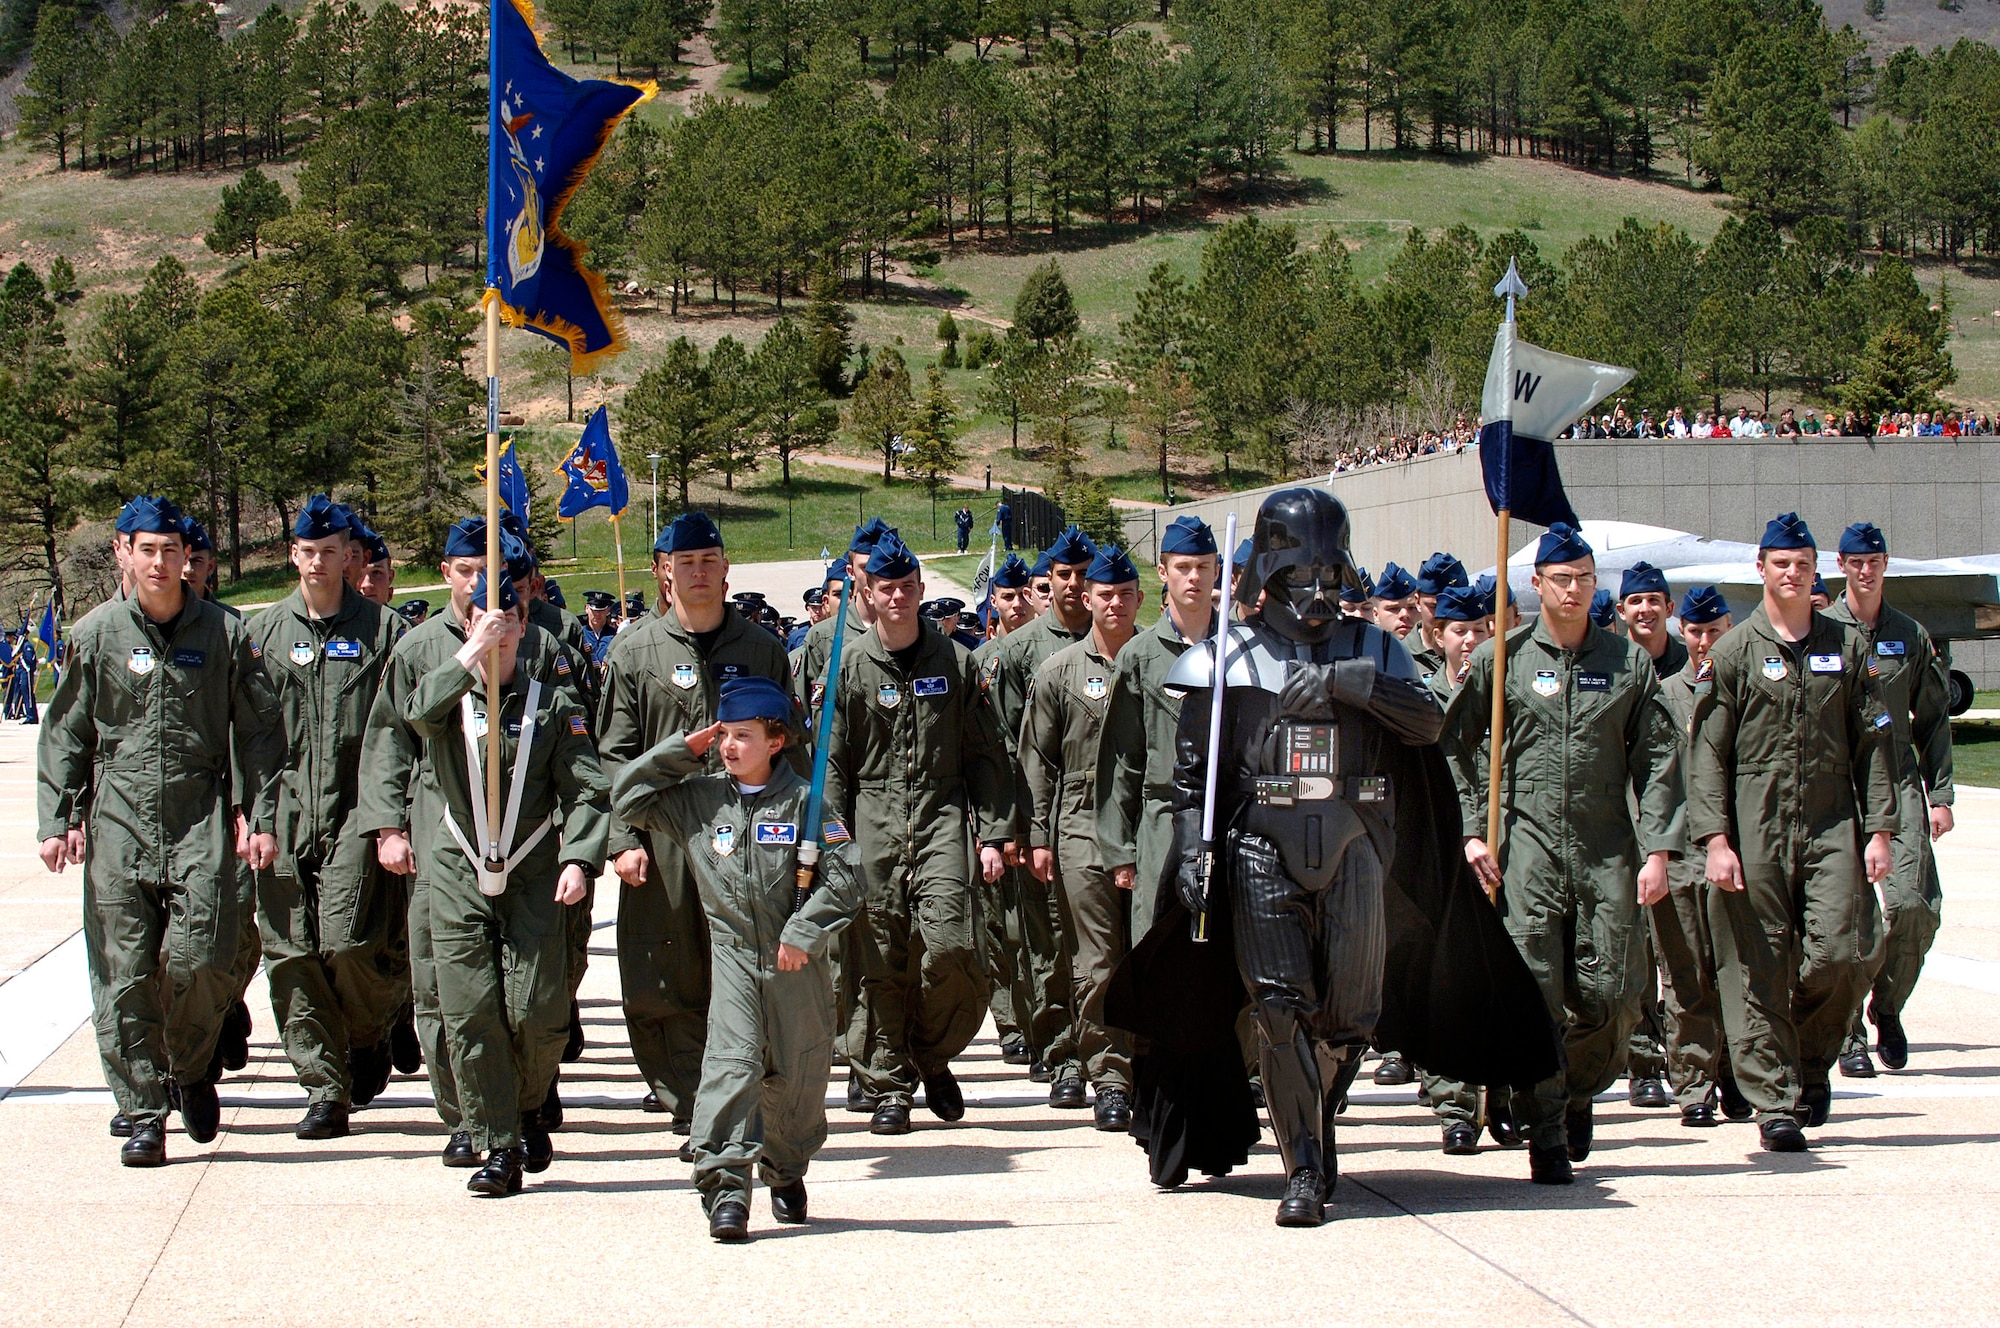 Ten-year-old Julian Willis and a special visitor lead Cadet Squadron 39 during a formation at the U.S. Air Force Academy, Colo.  The Make-a-Wish Foundation and the Air Force Academy made Julian a "Cadet for a Day".  Cadets donate money for the program and have sponsored 22 children since the program started in 2000. (U.S. Air Force photo/Mike Kaplan)